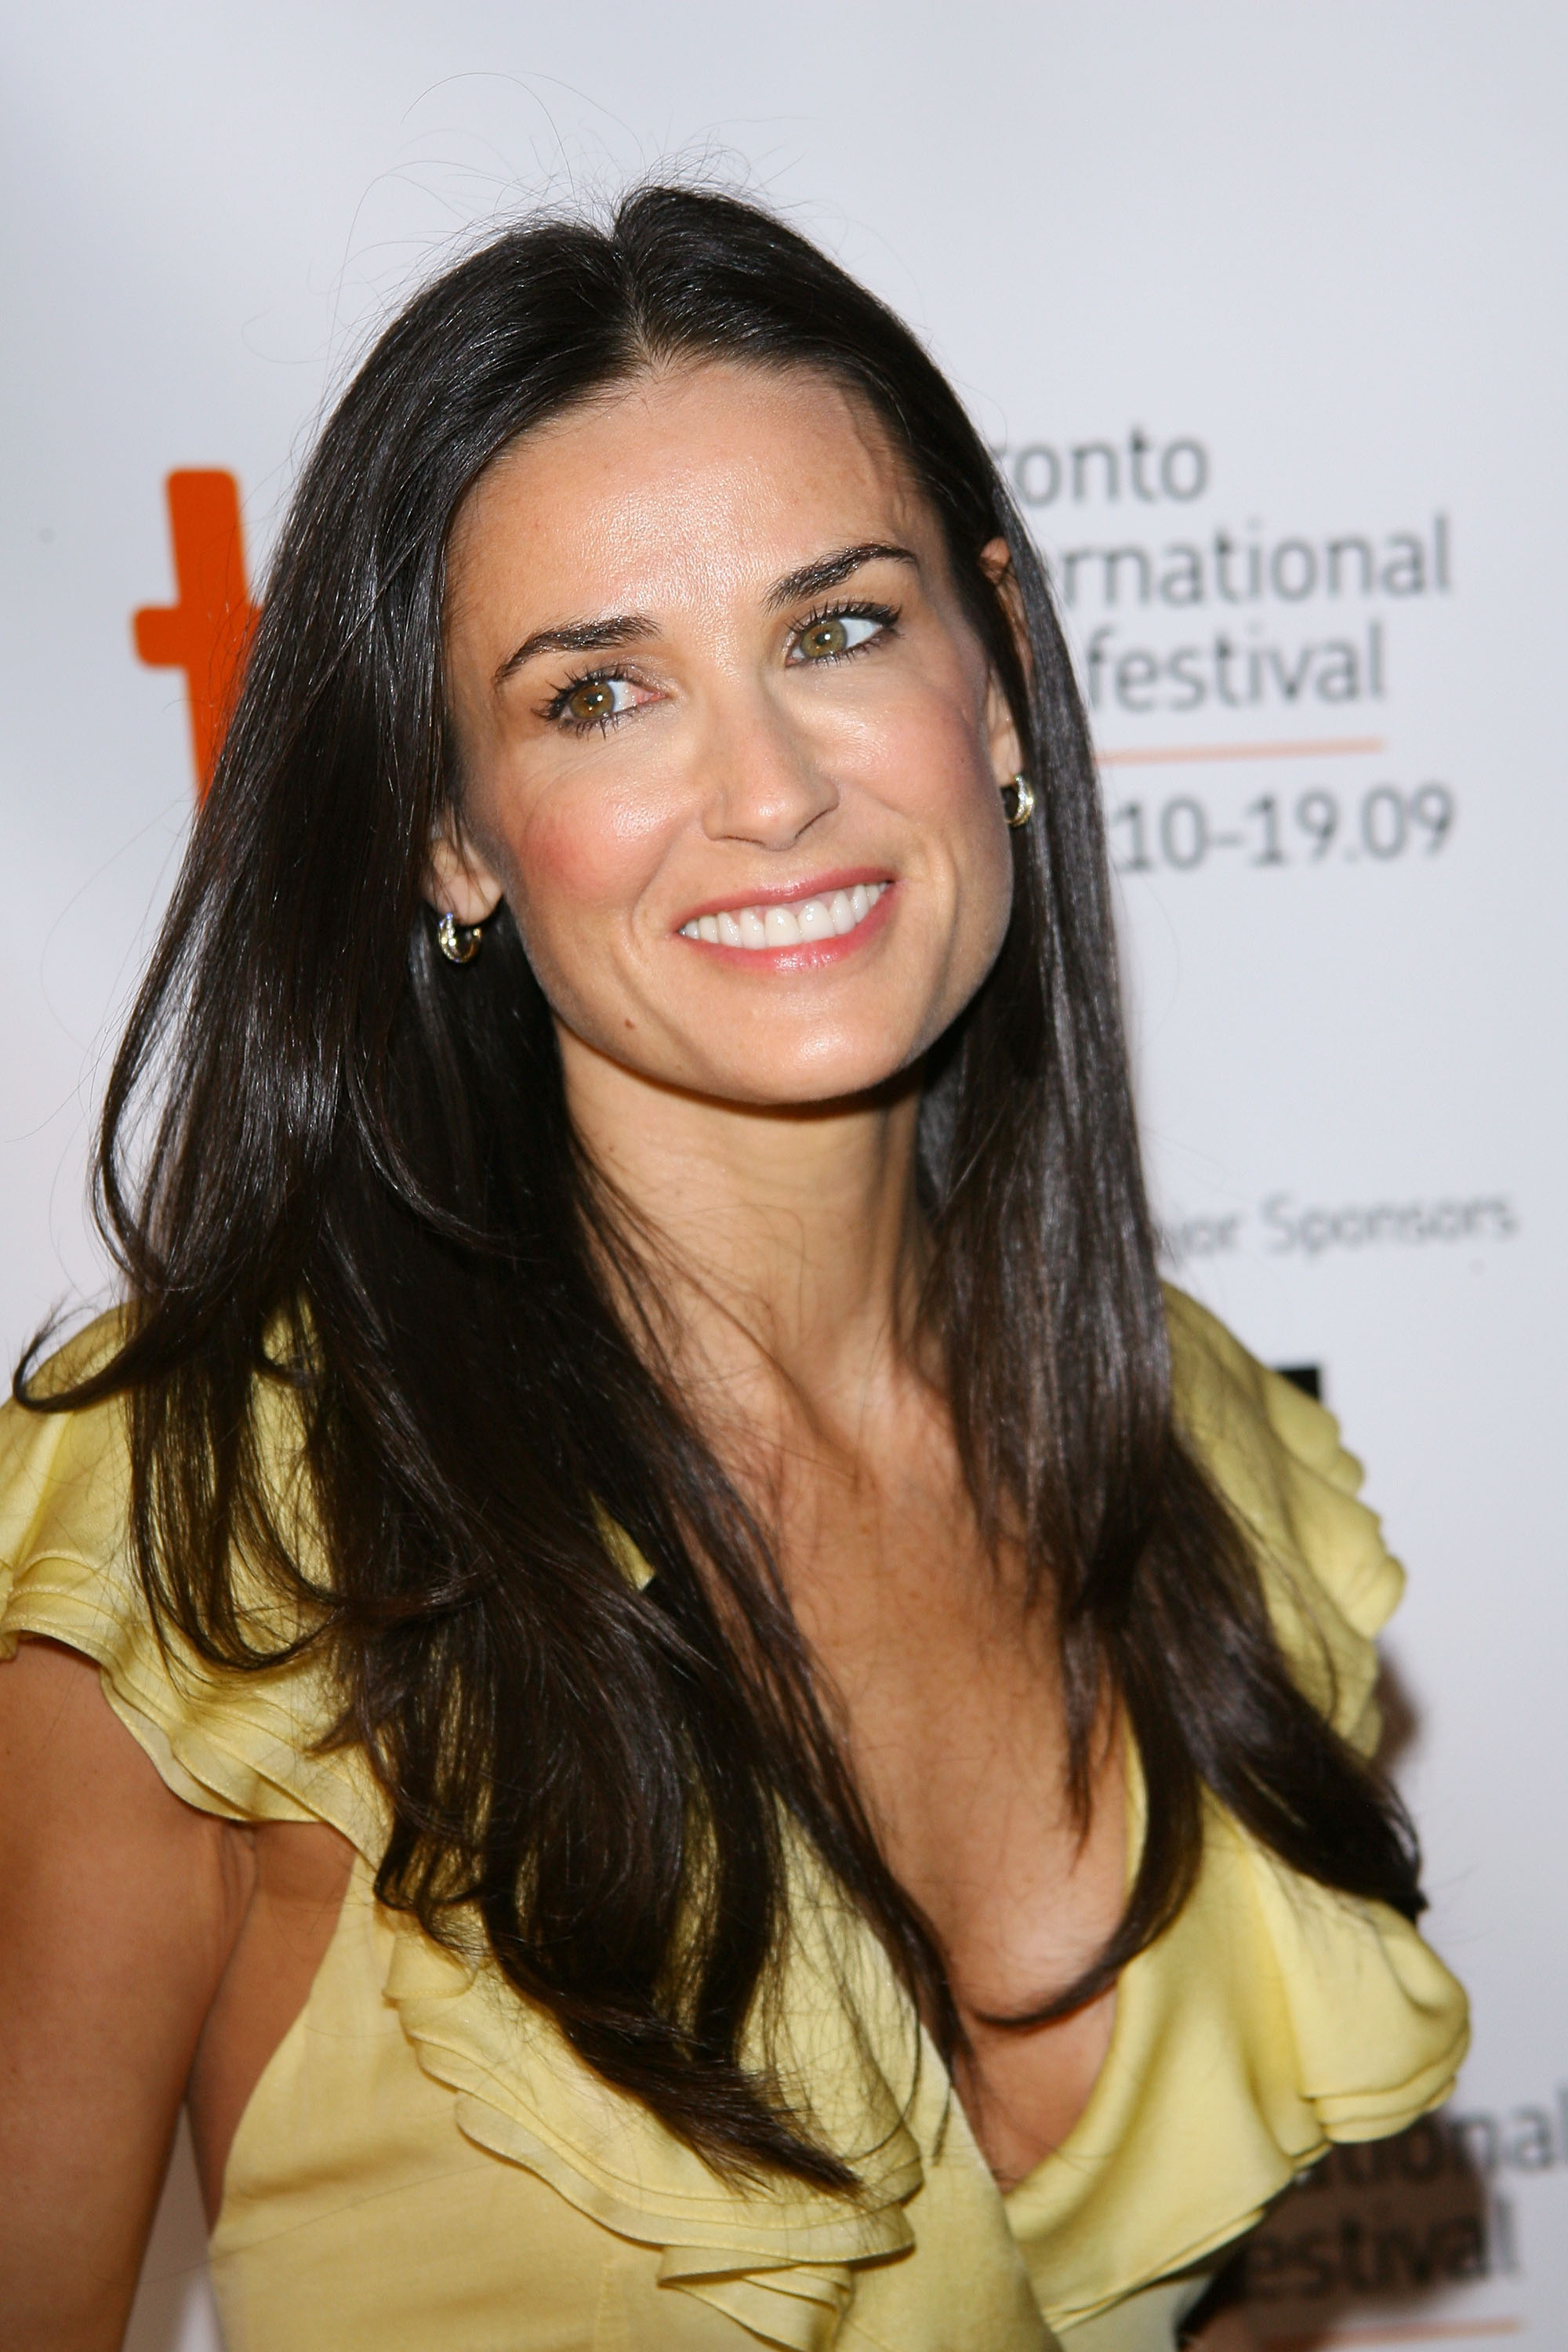 Demi Moore smiles at an event wearing a ruffled yellow top and earrings